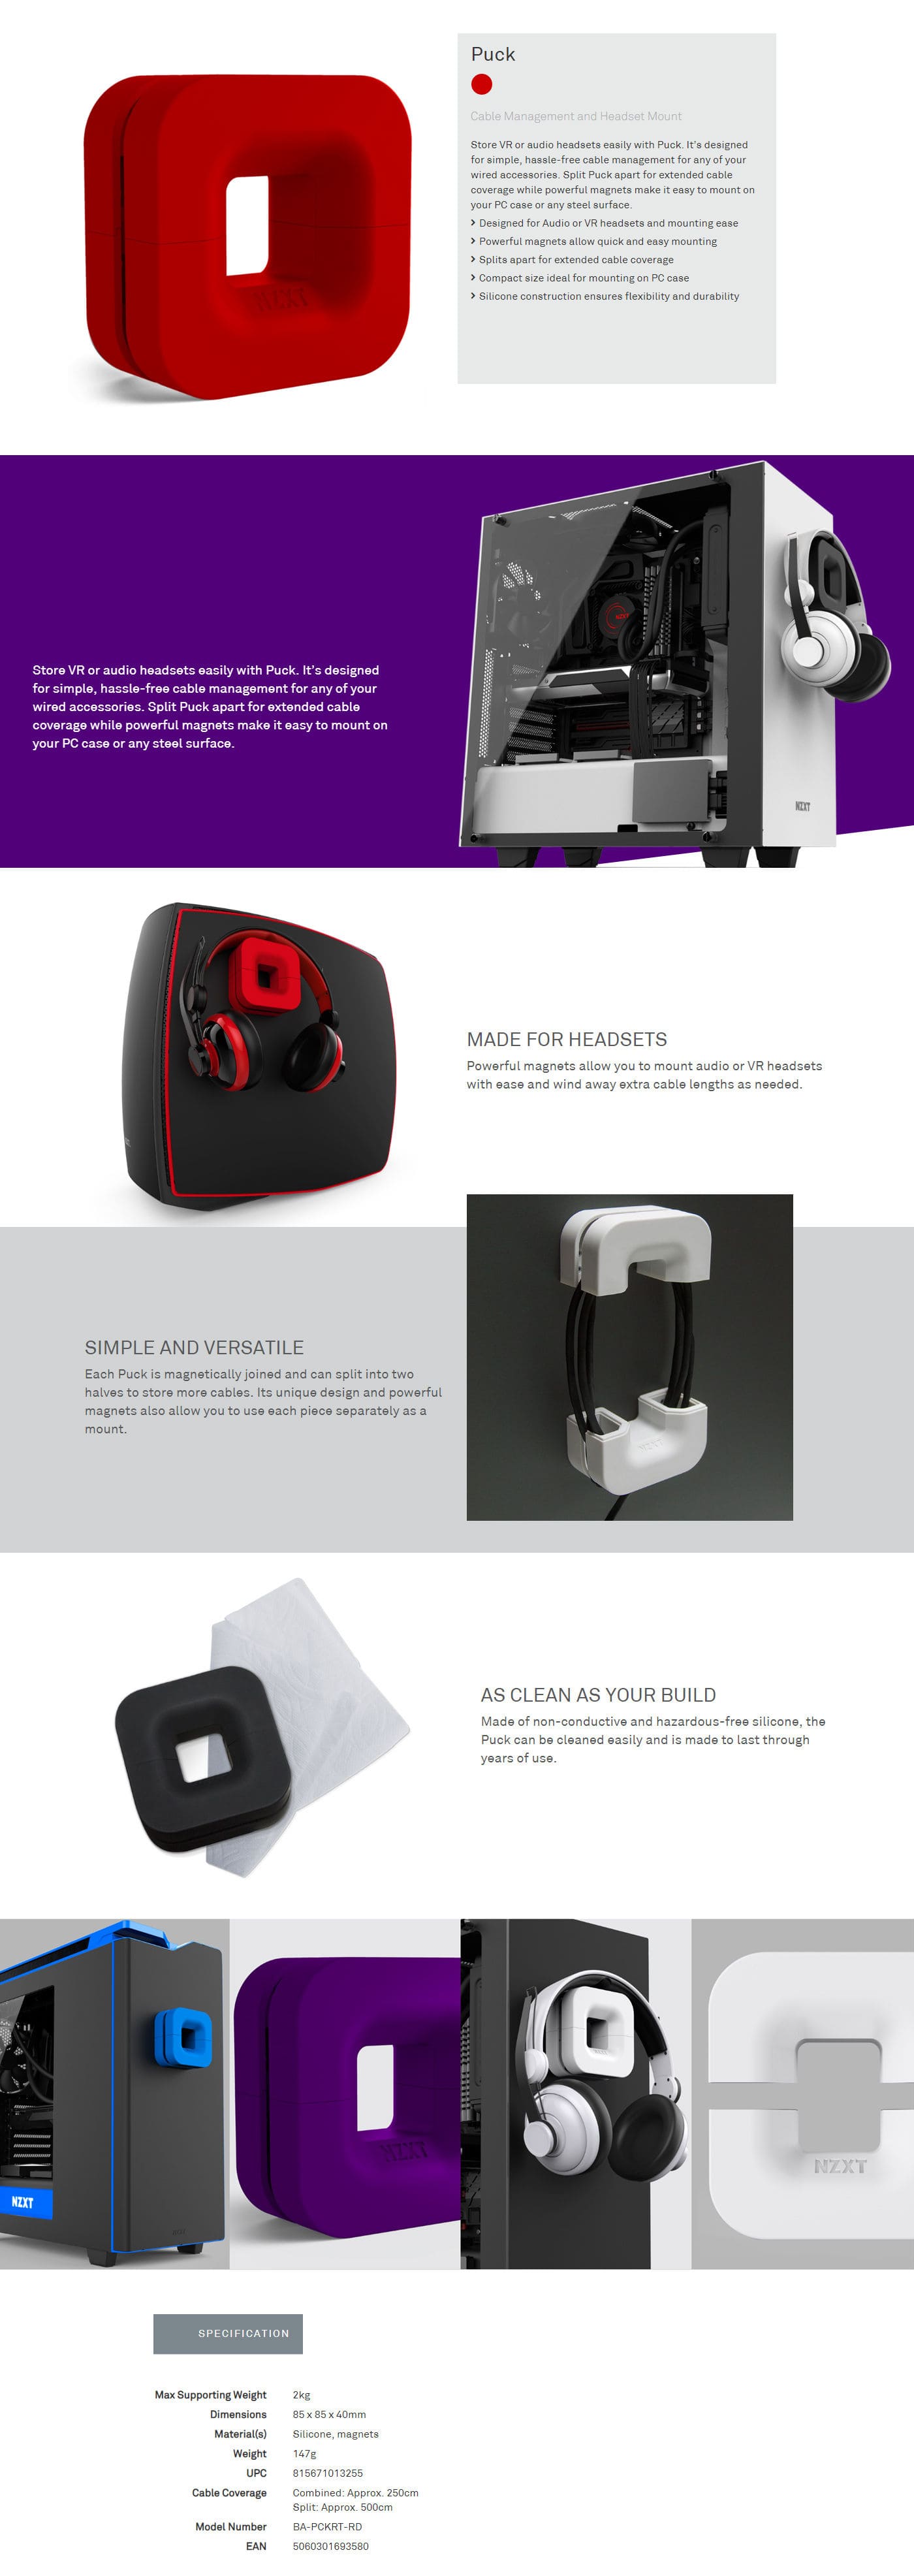  Buy Online Nzxt Puck Cable Management and Headset Mounting Solution - Red (BA-PCKRT-RD)